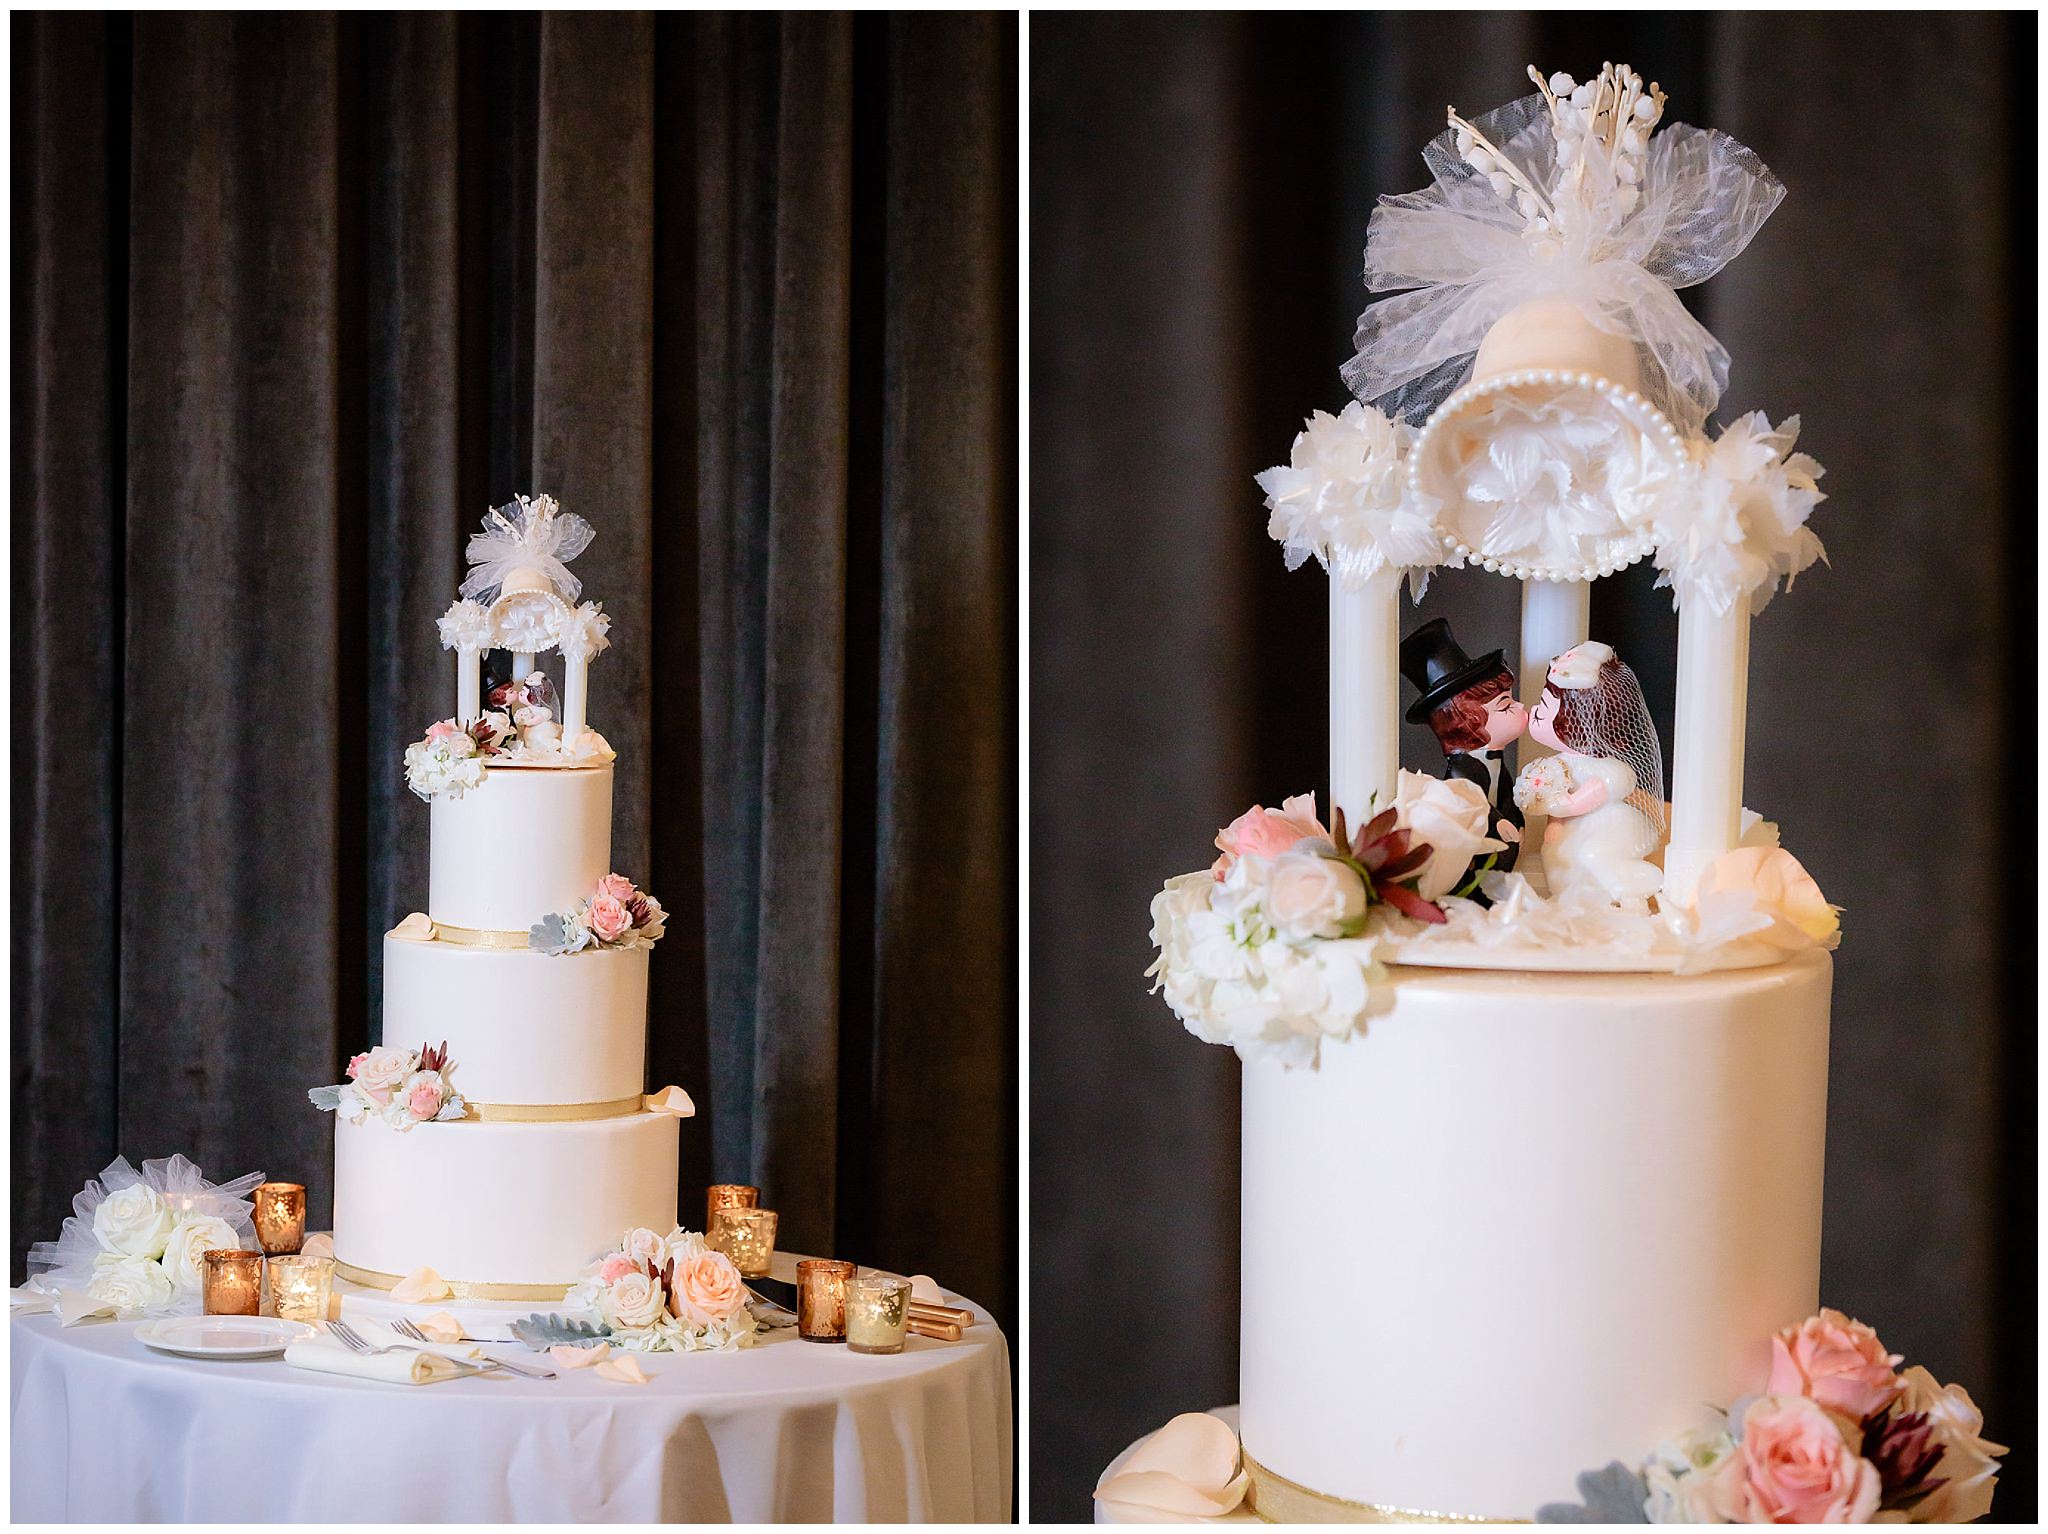 Wedding cake by Tasty Bakery with vintage cake topper at a Hotel Monaco wedding